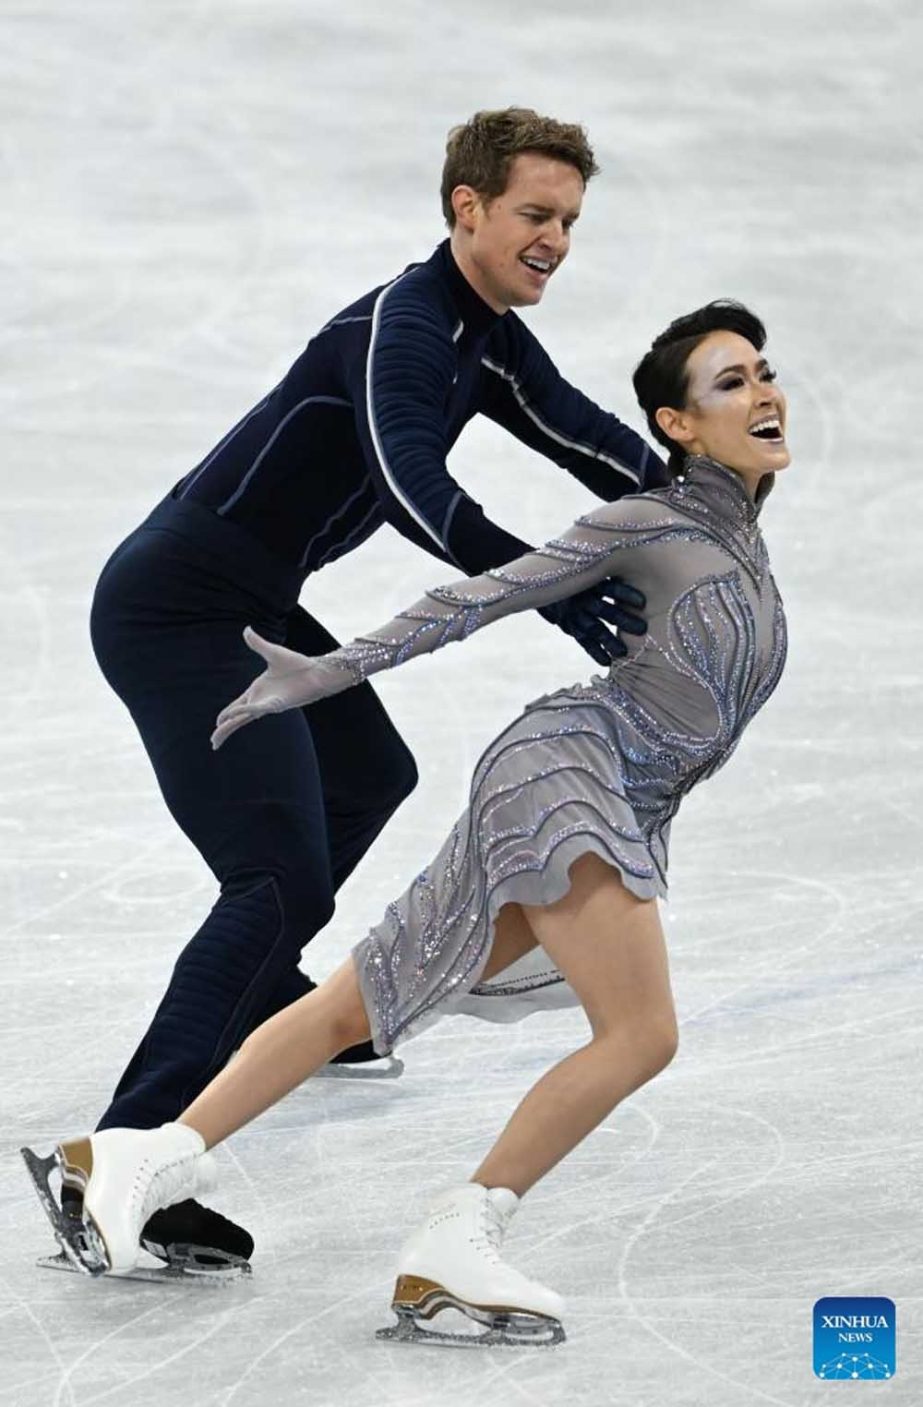 Madison Chock (left) and Evan Bates of the United States perform during the figure skating team event of ice dance at Capital Indoor Stadium in Beijing, capital of China on Monday. Agency photo